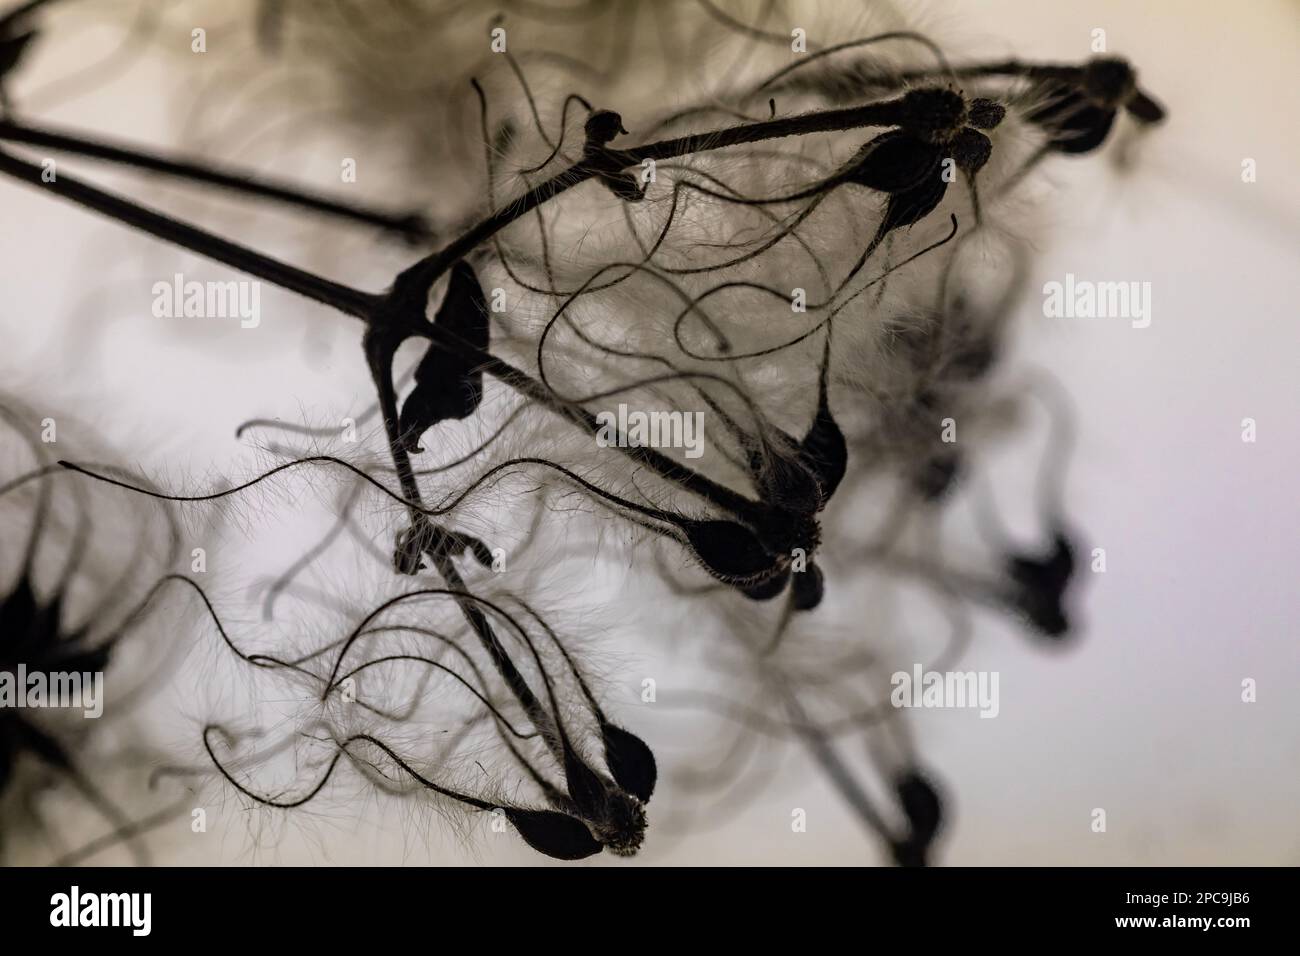 WA23255-00...WASHINGTON - Open seed pods surrounded by numerous feathers, promising some wind dispersal. Stock Photo